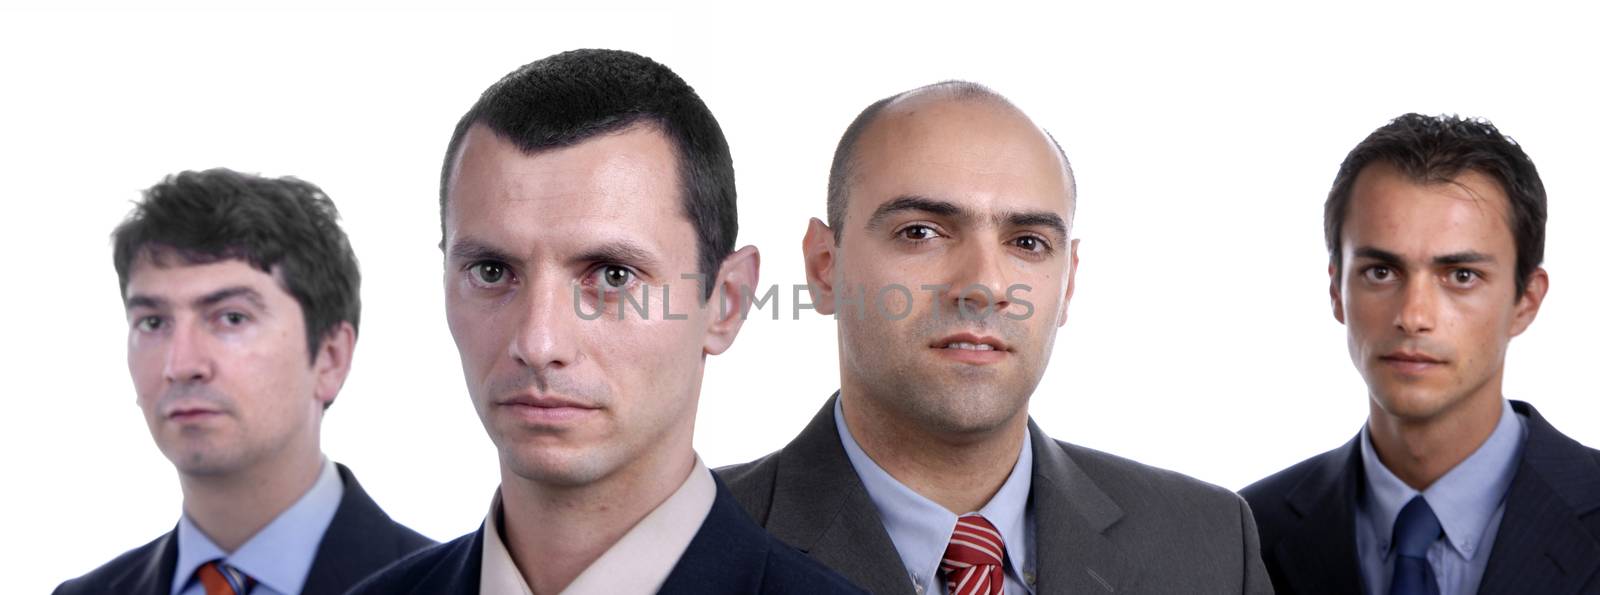 young business men portrait on white. focus on the second man